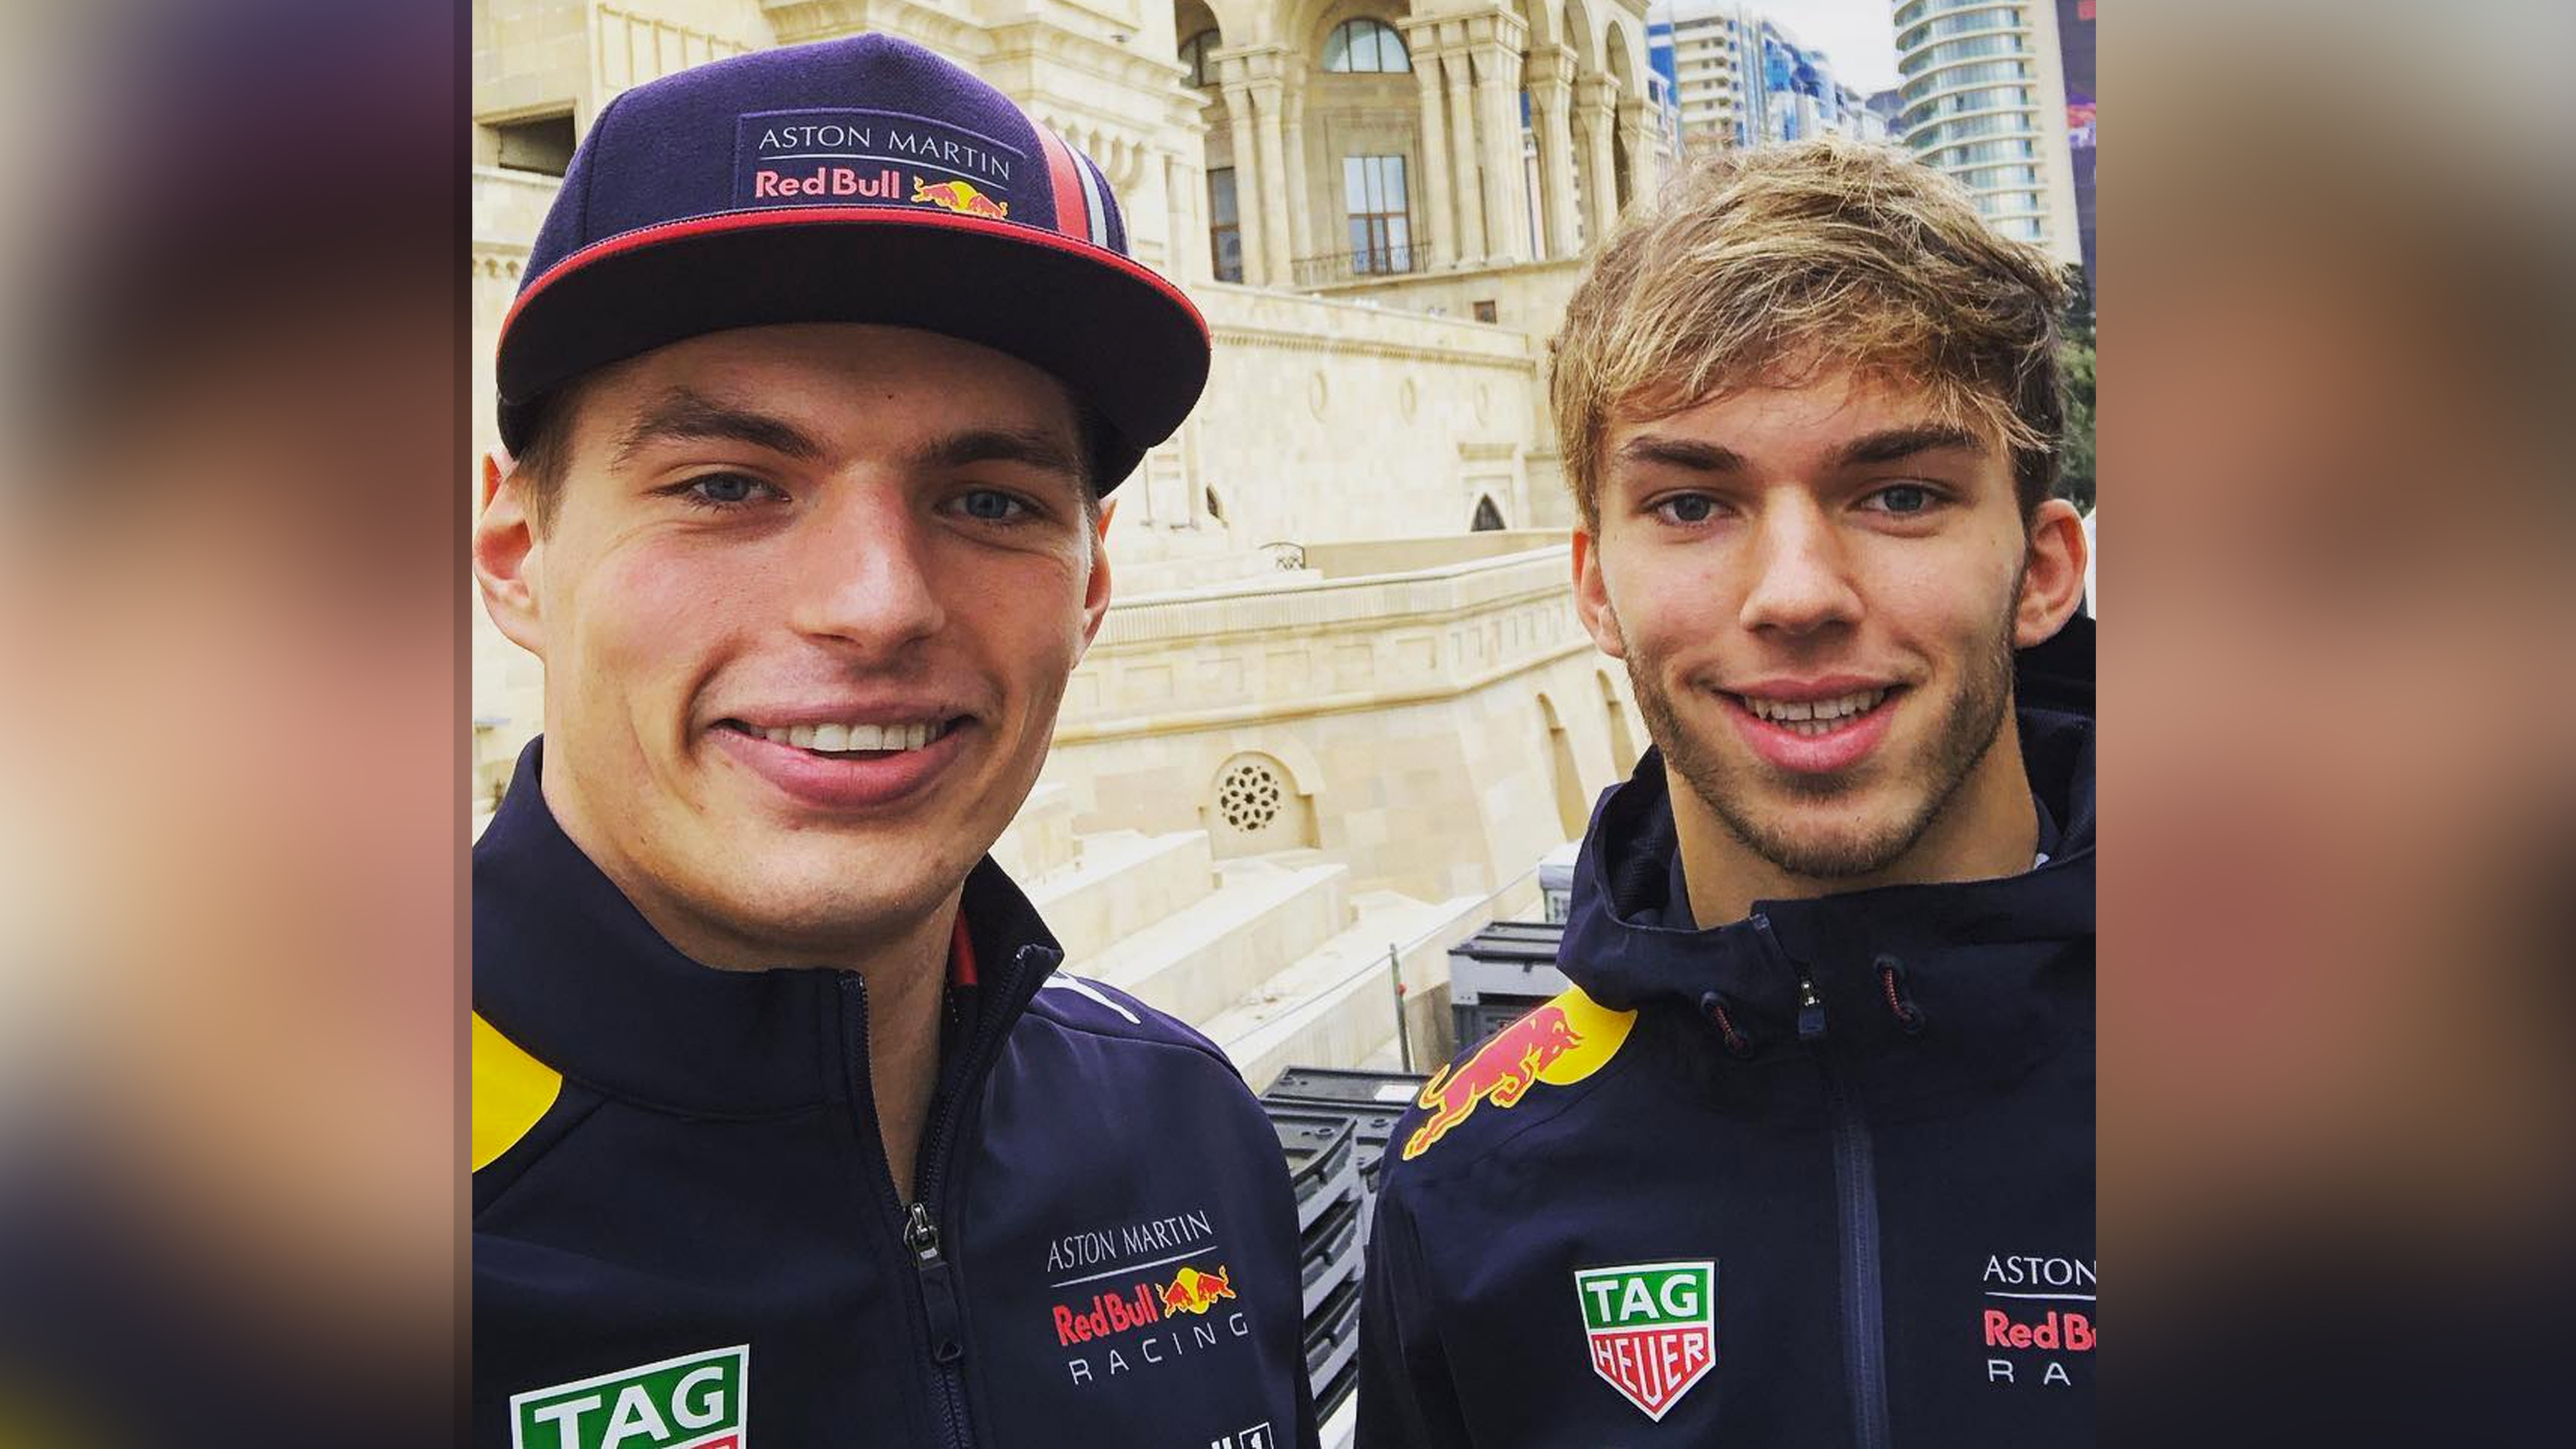 Pierre Gasly: Max Verstappen the best driver on the grid